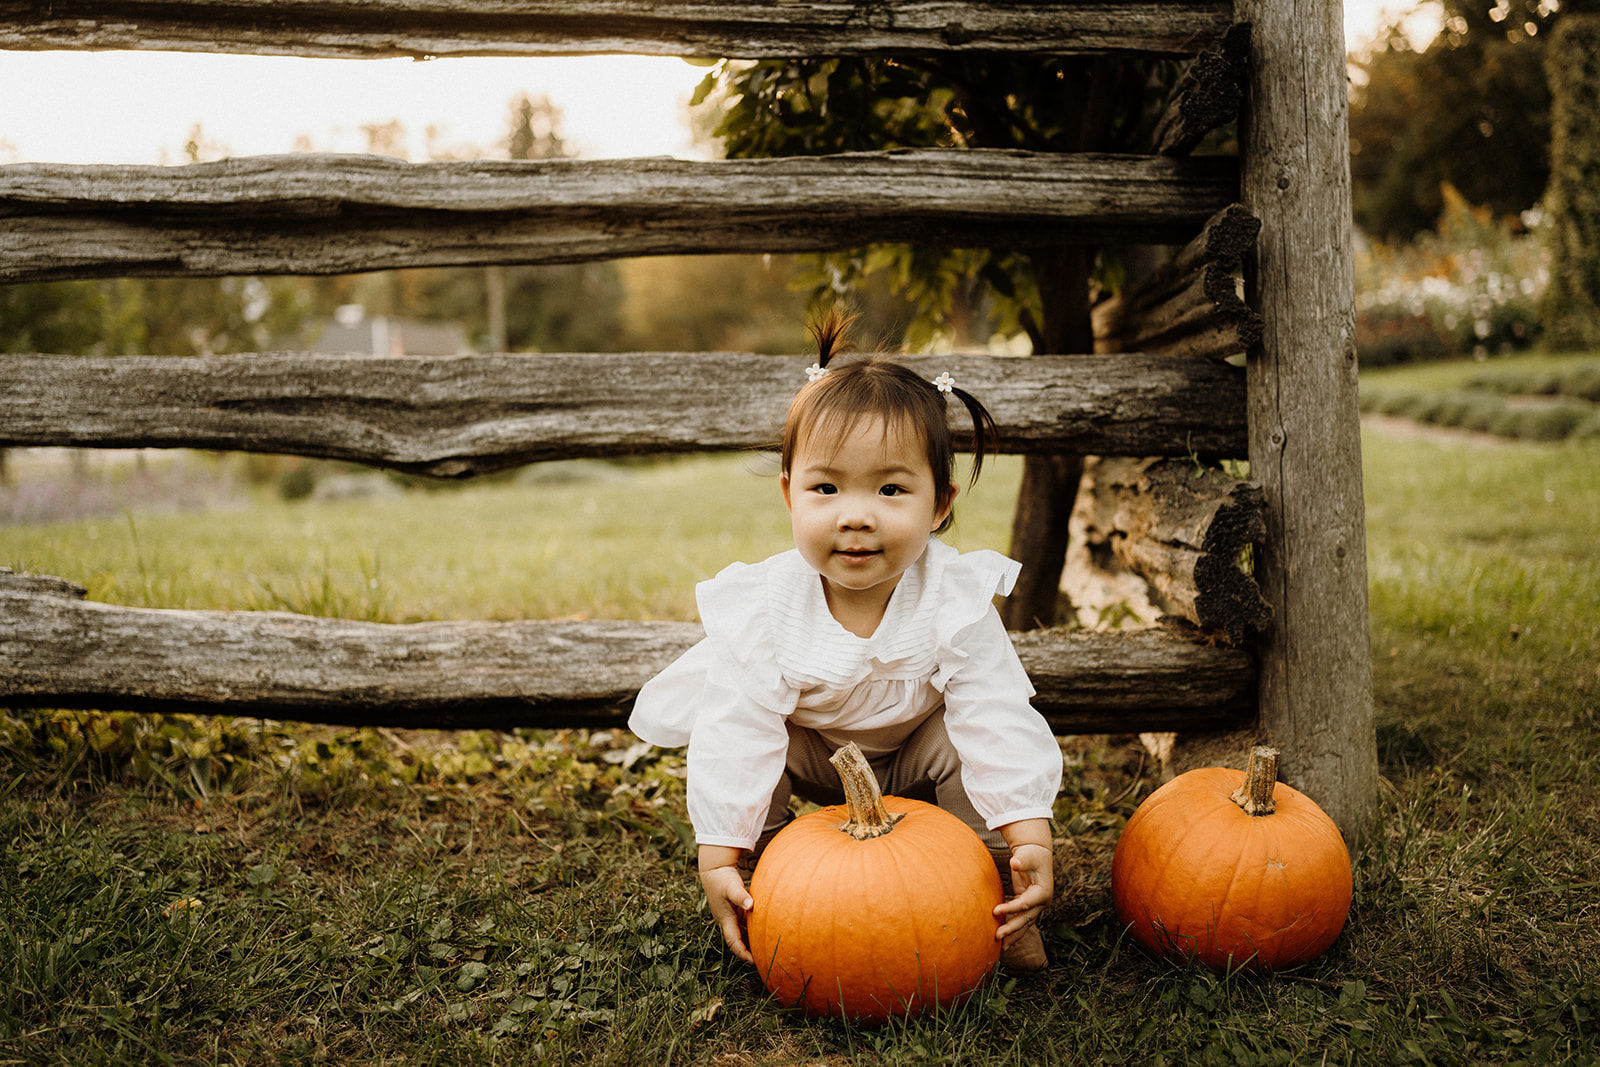 Child holding a pumpkin on the ground.